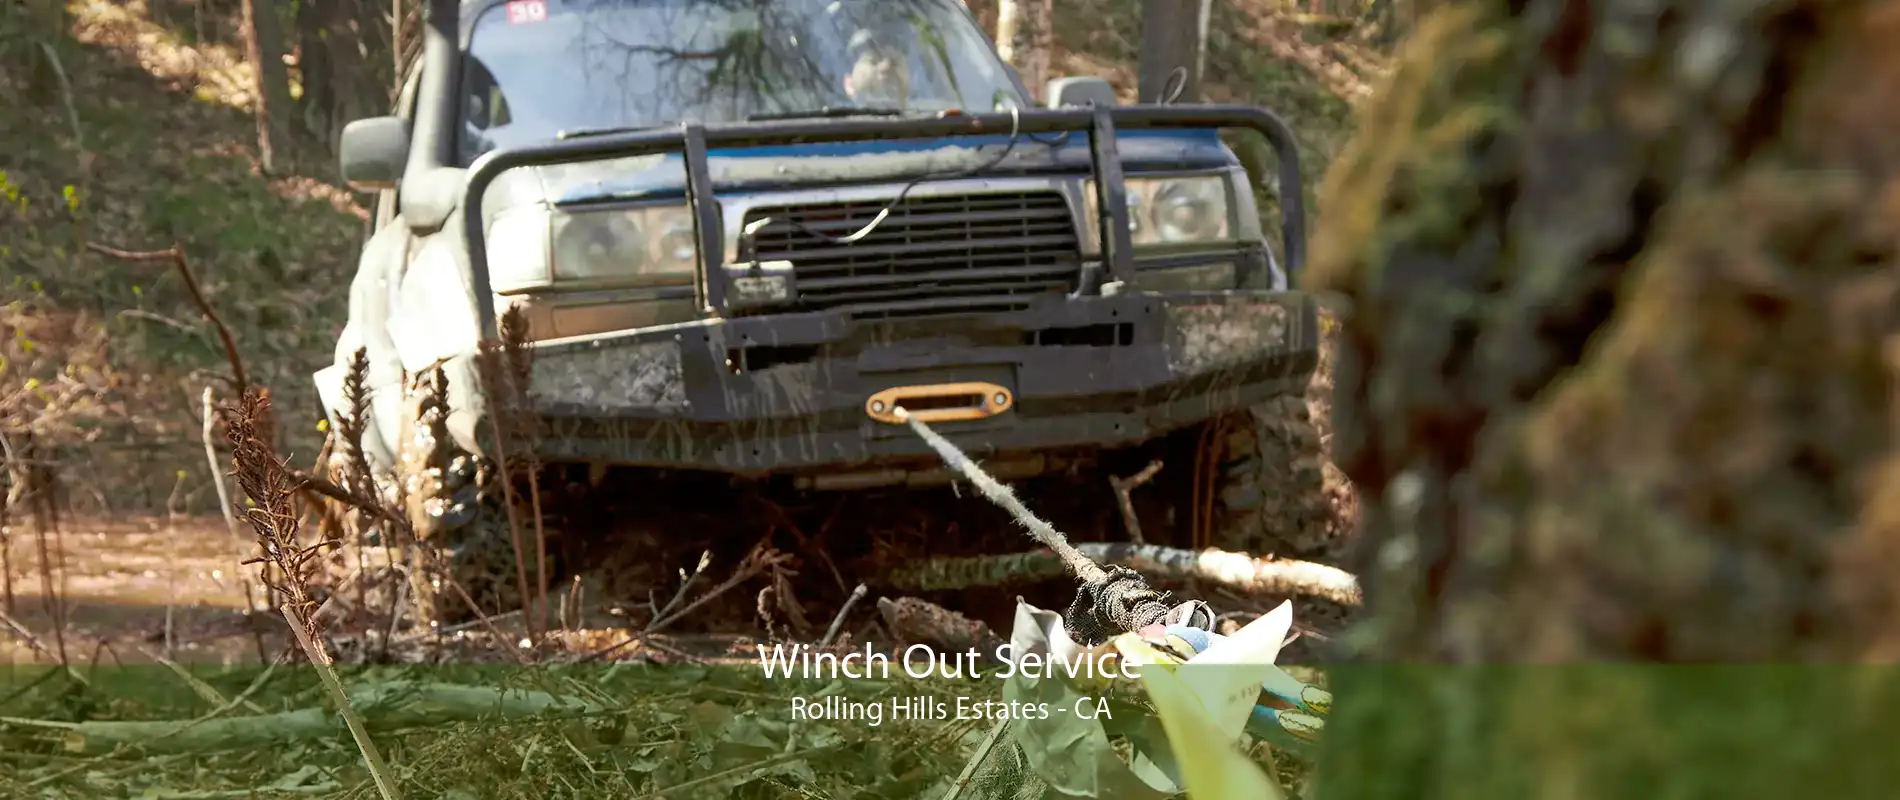 Winch Out Service Rolling Hills Estates - CA